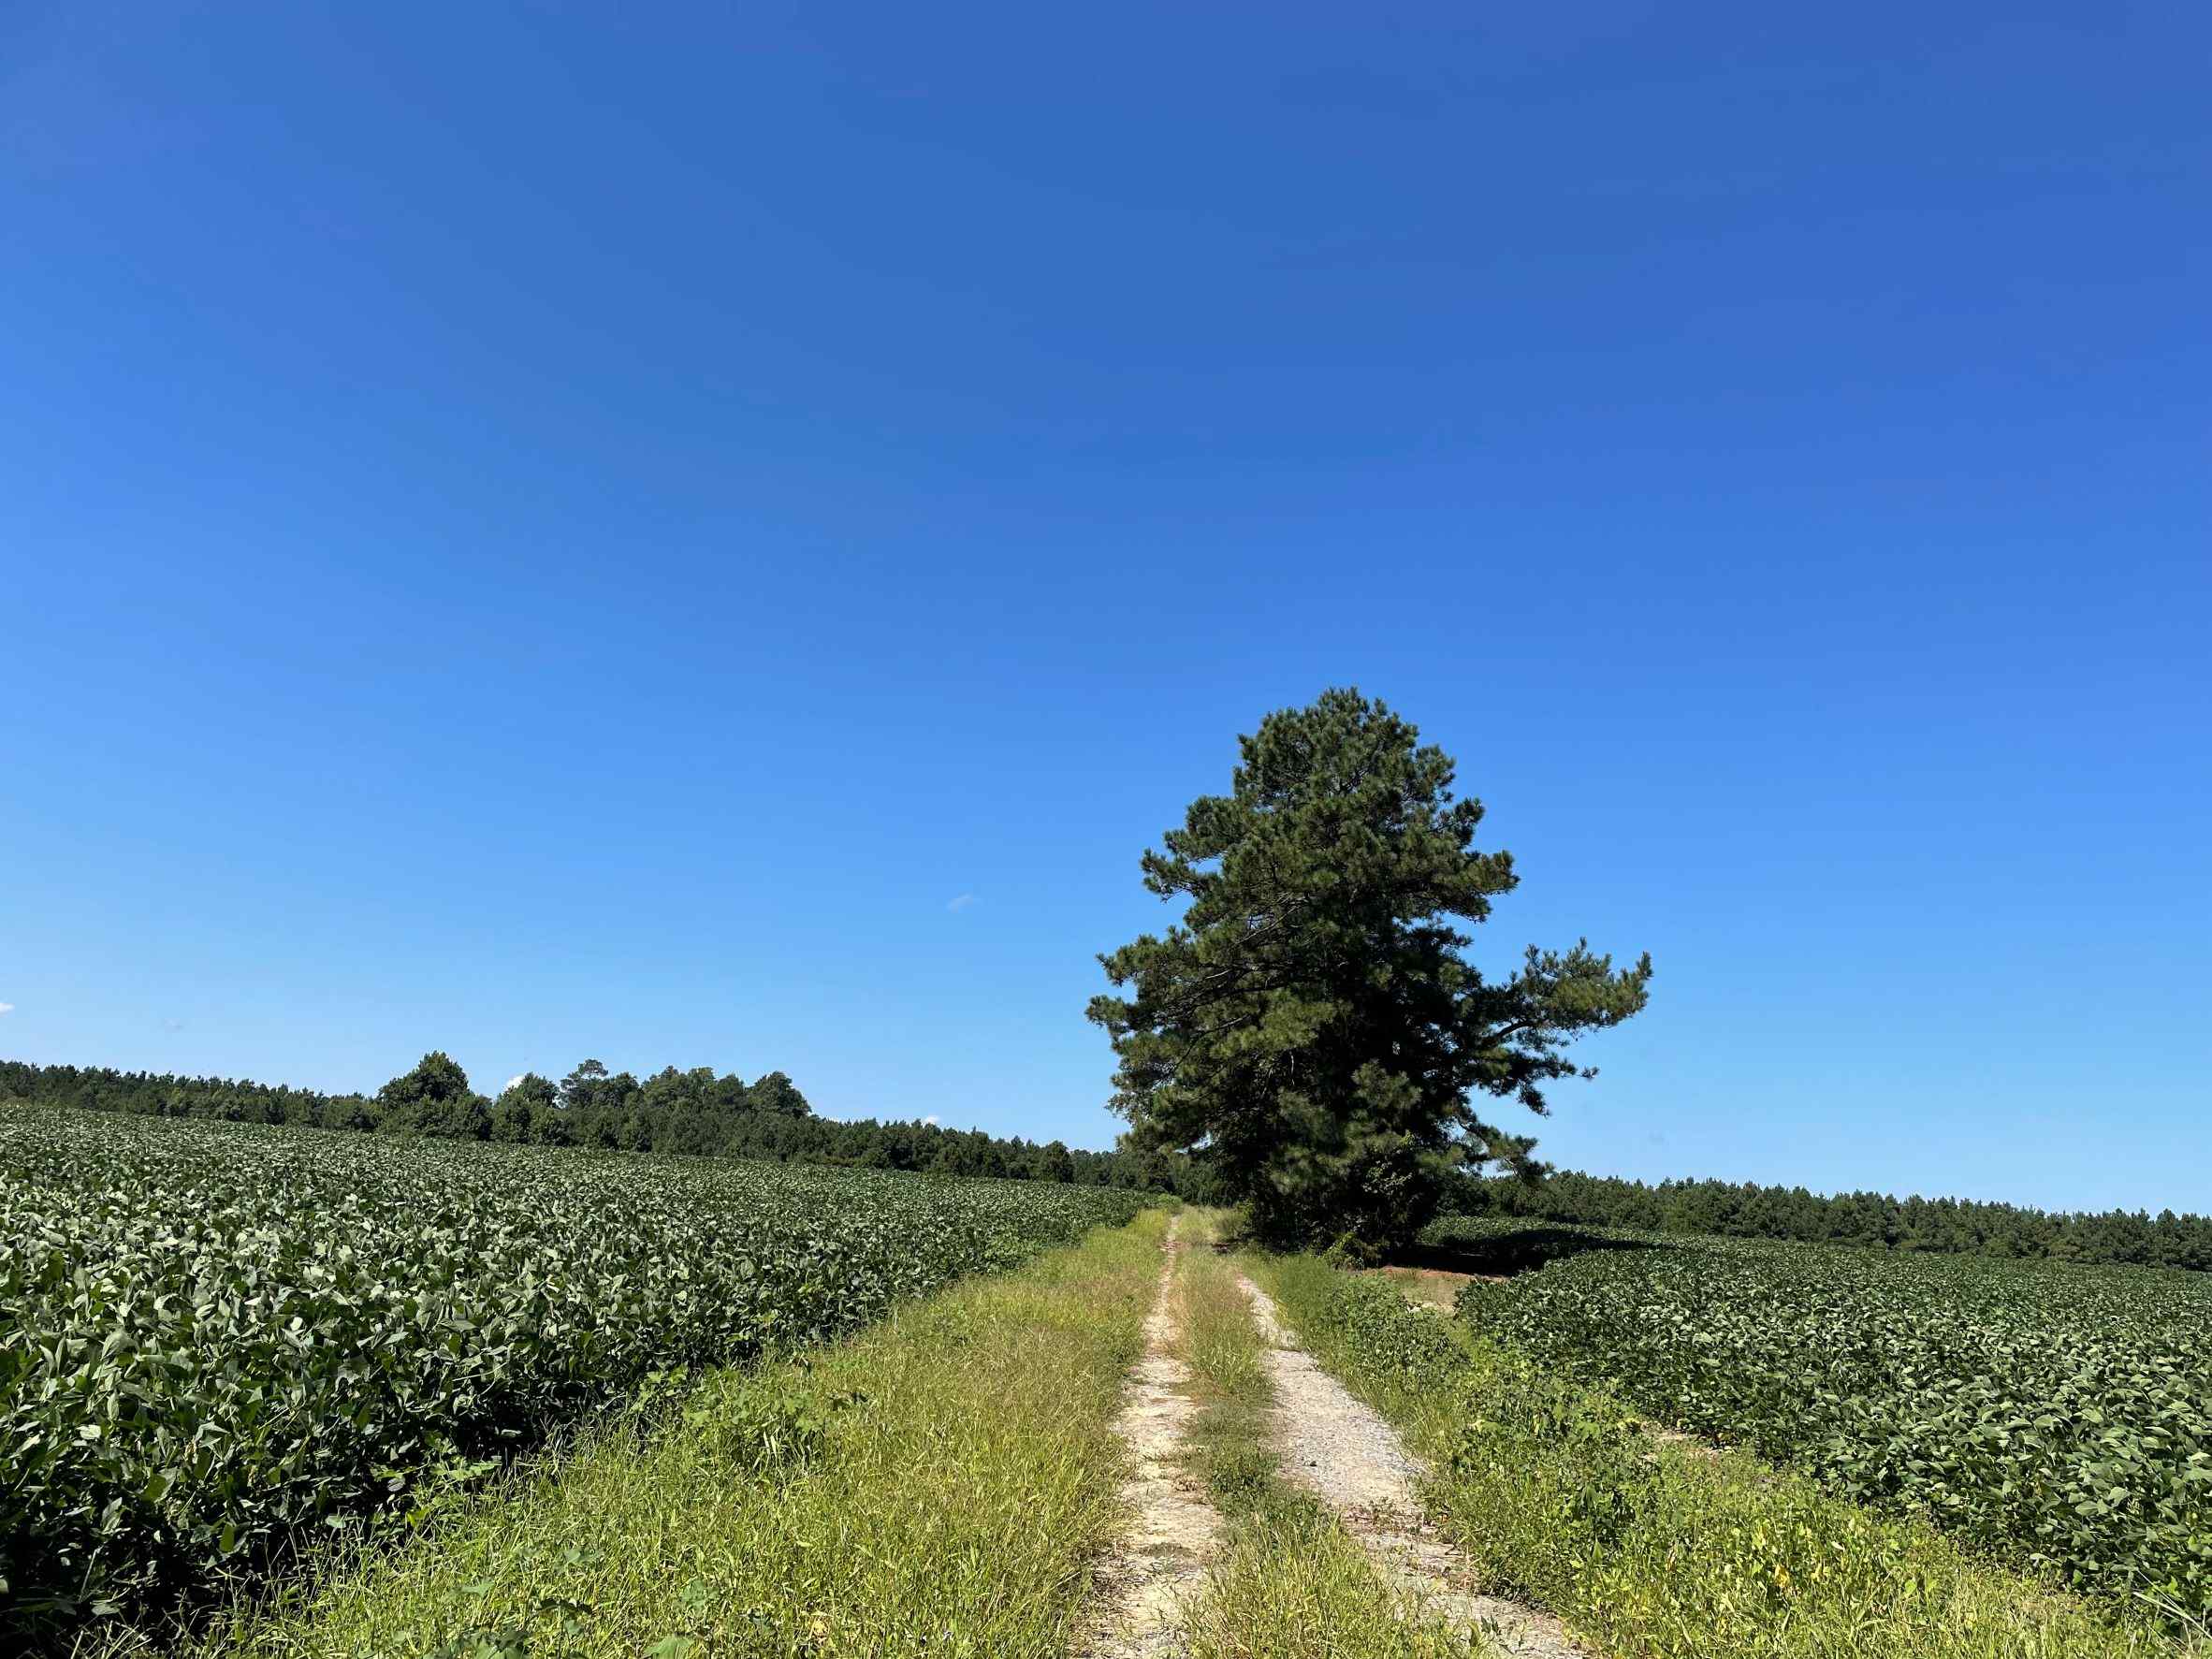 Sussex County Virginia Land for Sale